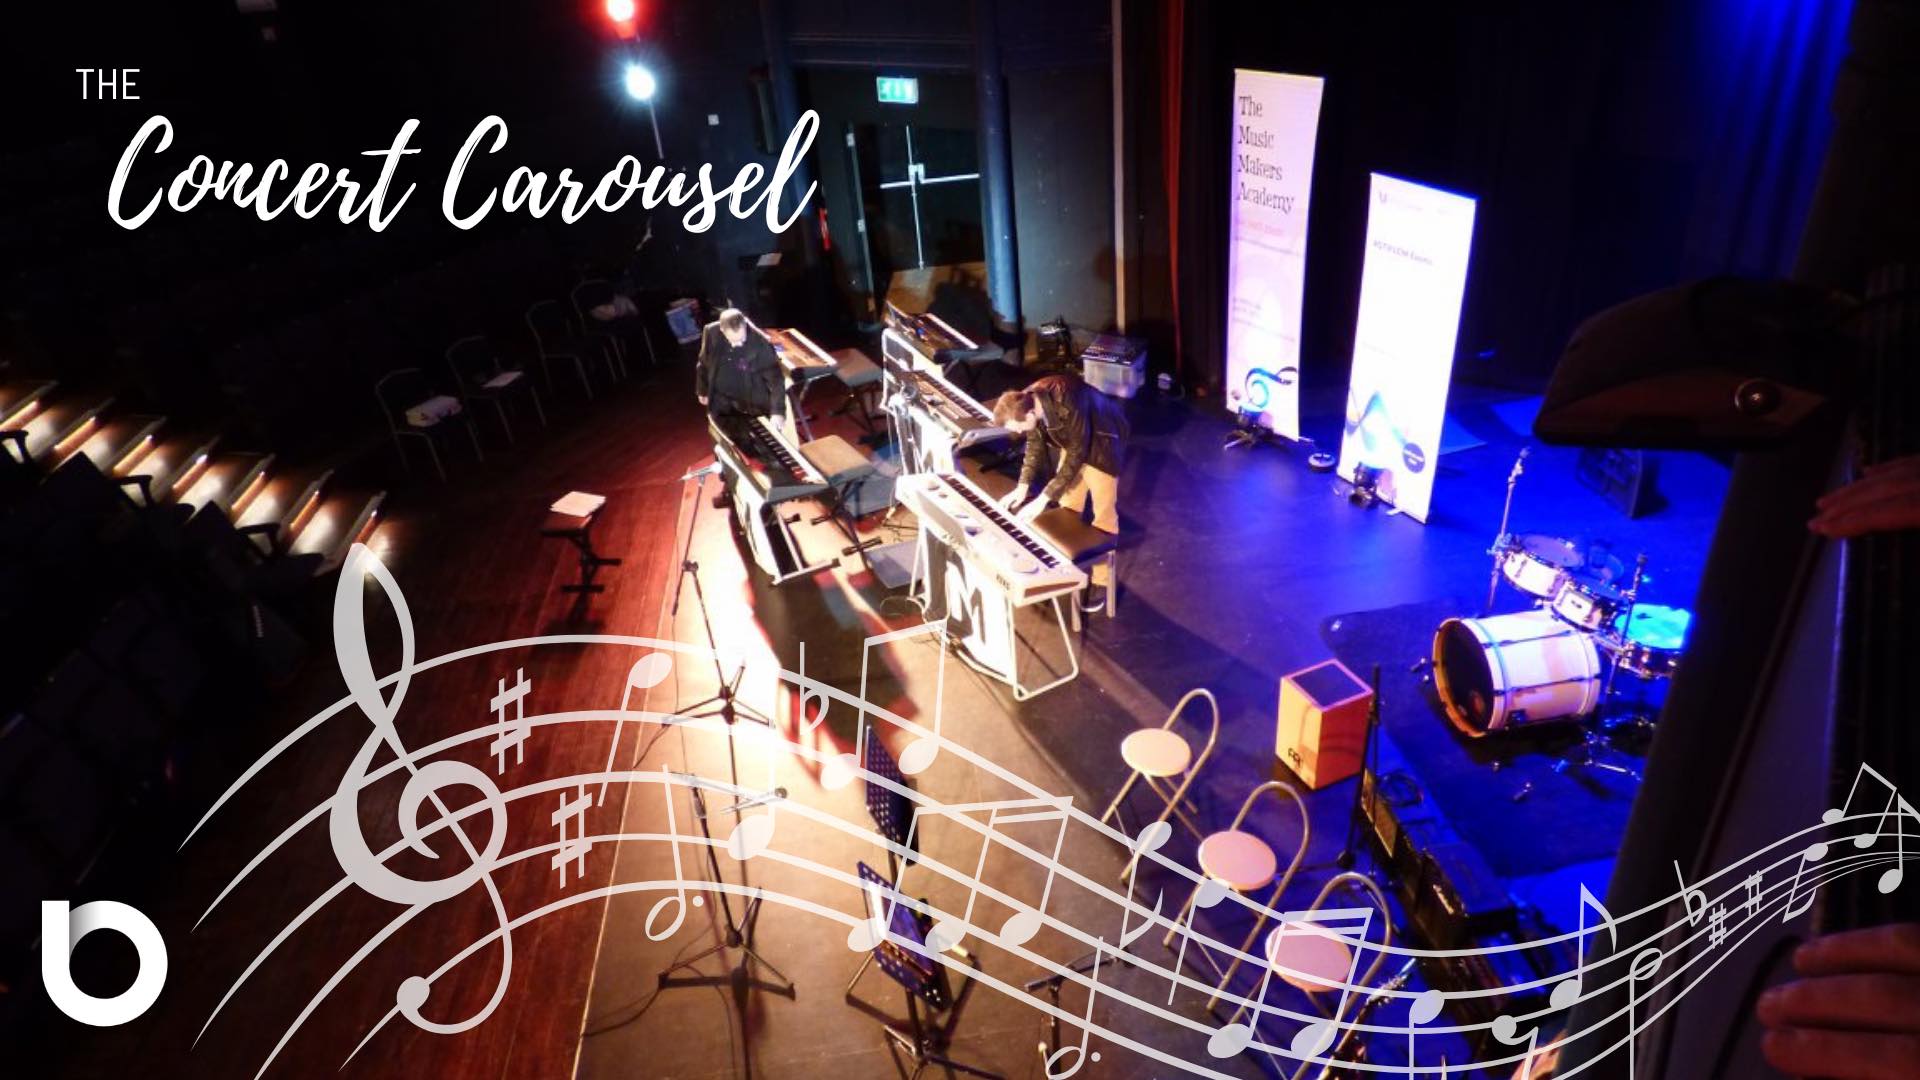 The Concert Carousel